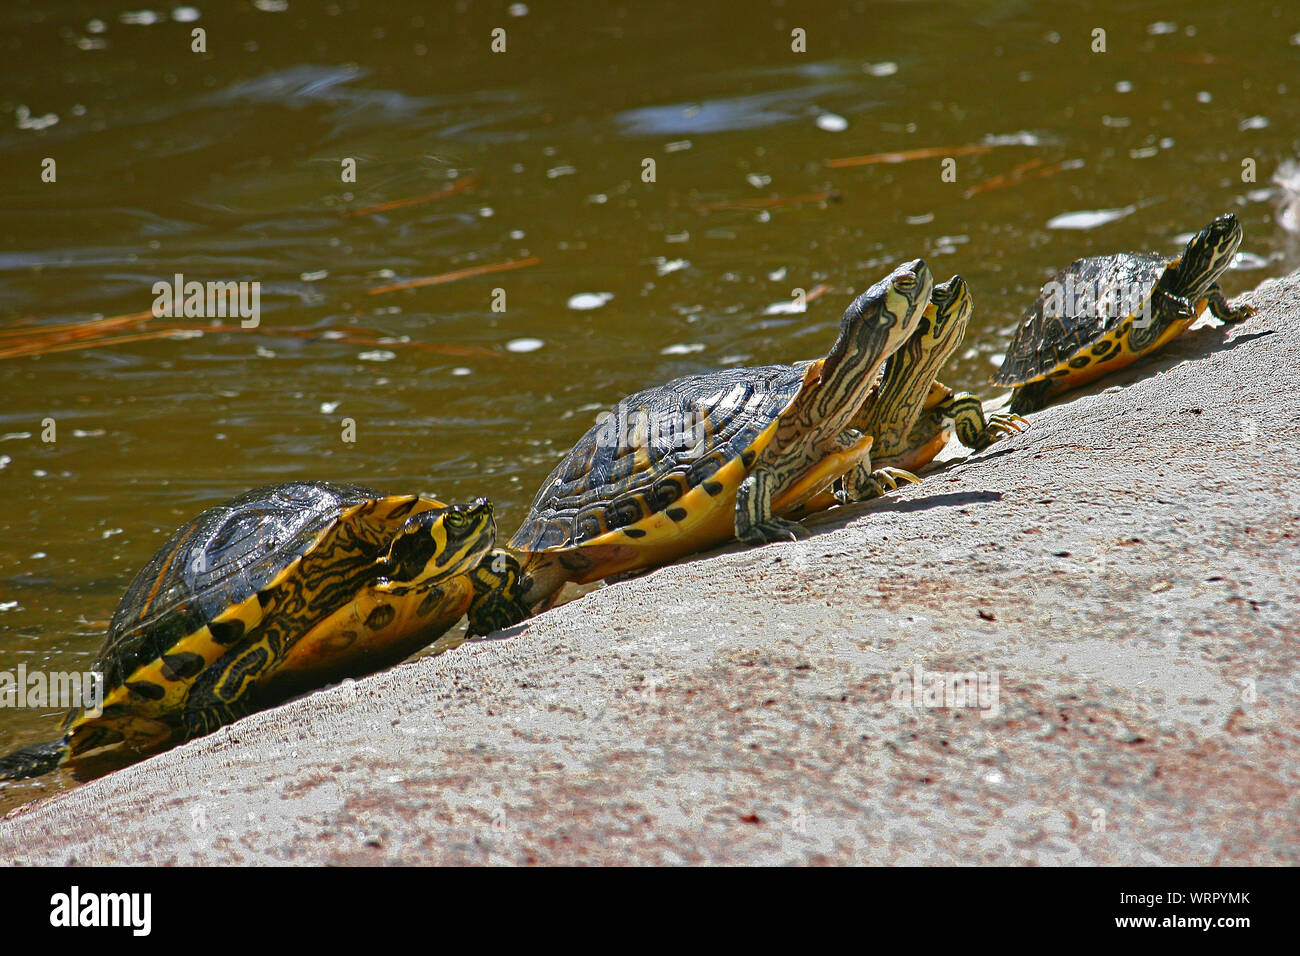 Terrapins basking by a pond in Guardamar, Alicante, Spain. These reptiles with shells (chelonians) love soaking up the sun. Stock Photo